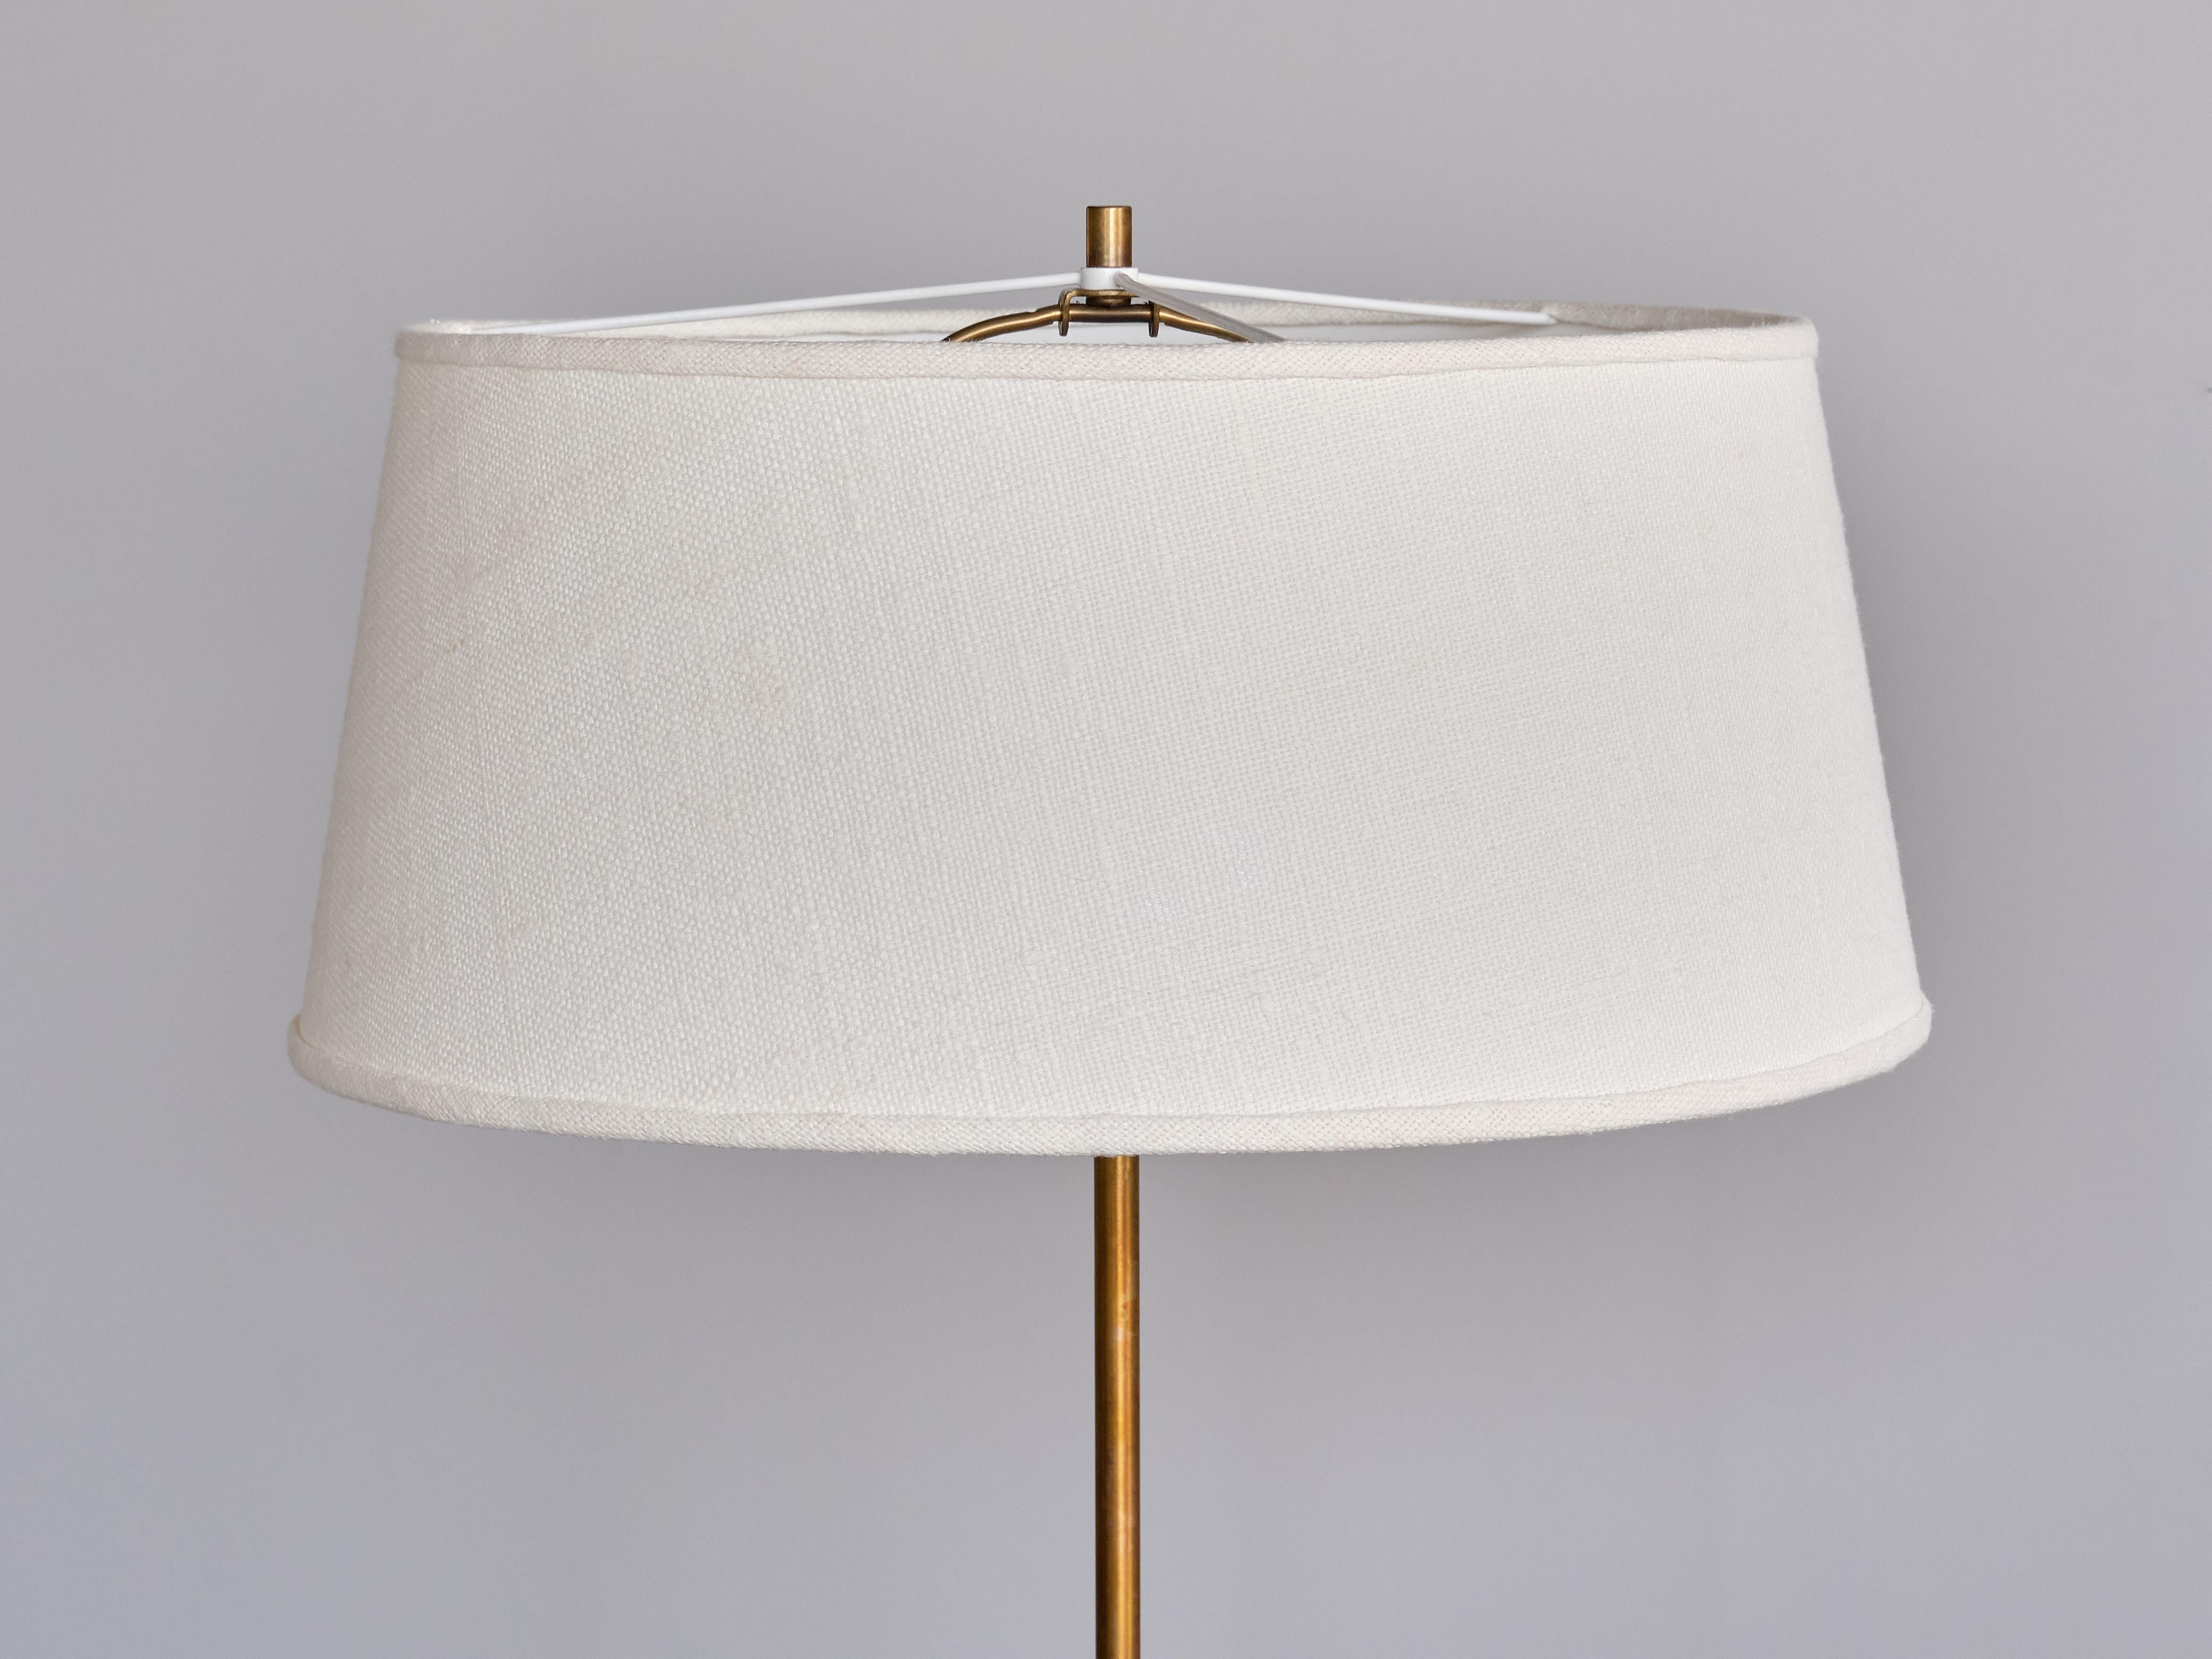 Pair of Bergboms G-31 Floor Lamps in Brass, Leather and Linen, Sweden, 1940s For Sale 7